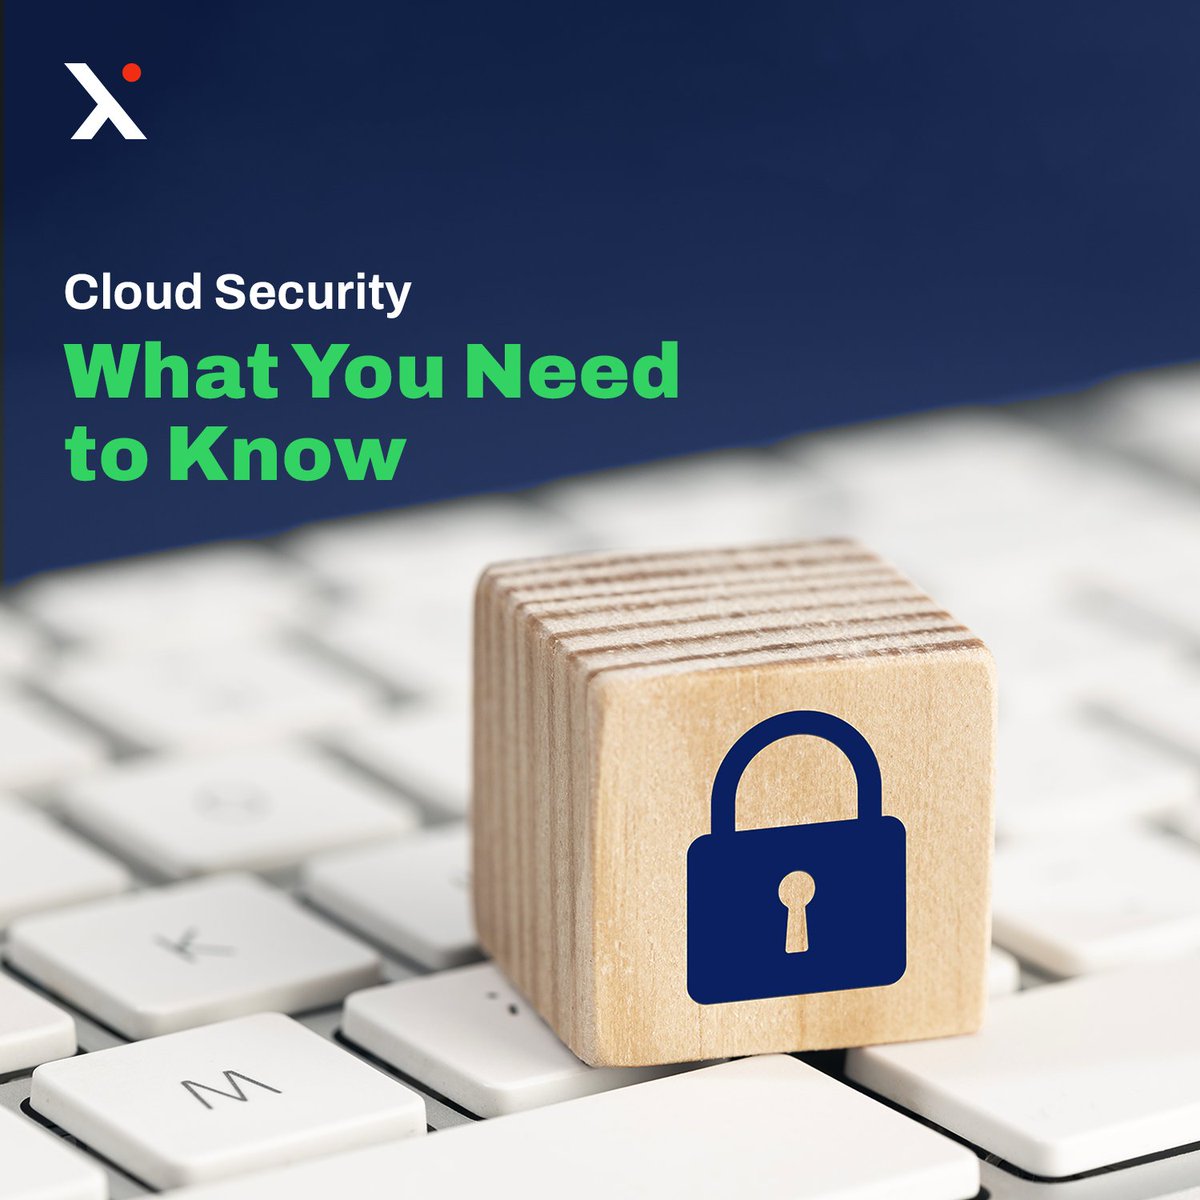 1/6 Here are some essential tips and strategies to secure your cloud environment effectively.

Tip 1. Implement Strong Access Controls: Restrict access to sensitive data and systems to authorized individuals only. Implement multi-factor authentication, role-based access...